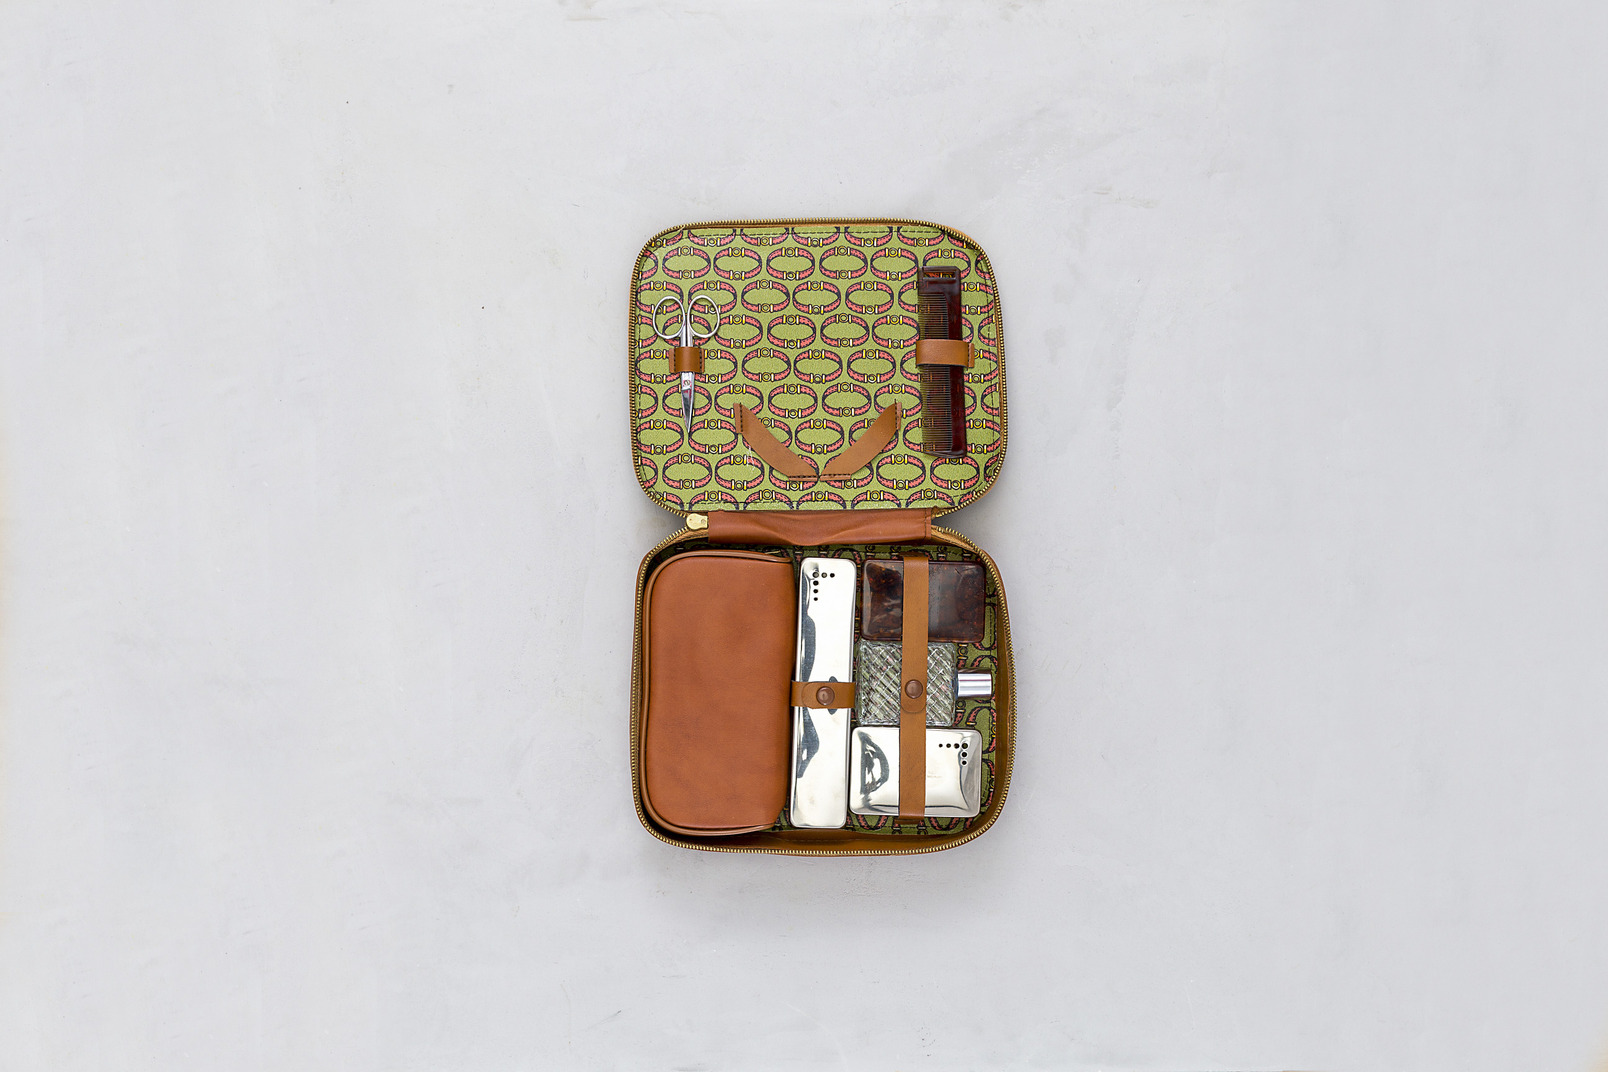 Comfortable and useful kit for 'on the road' cases